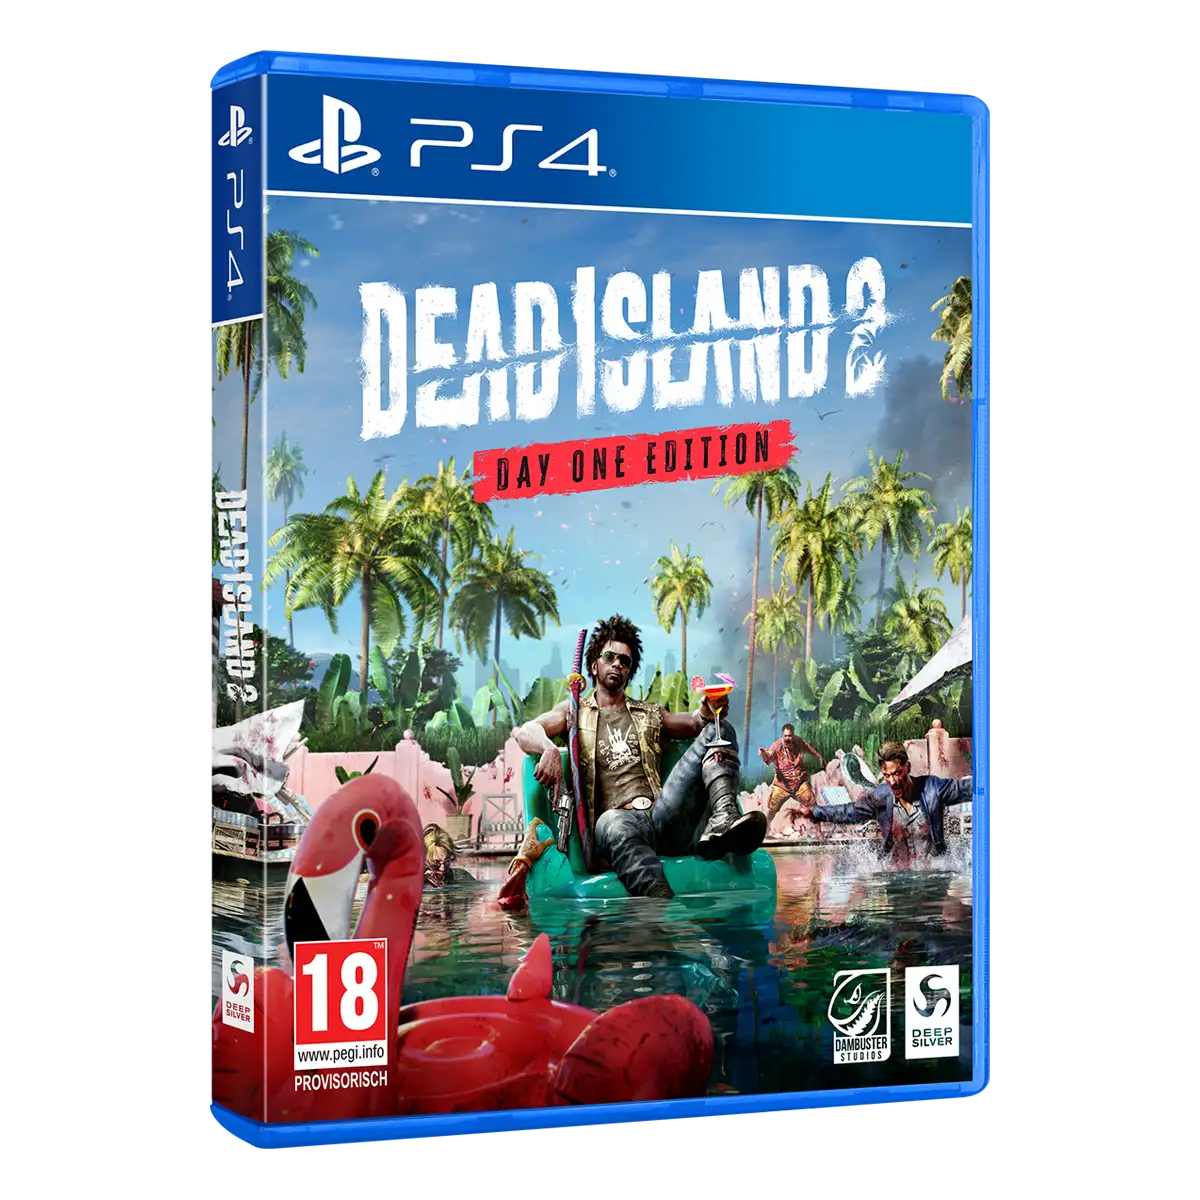 Dead Island 2 Day One Edition (PS4) (PEGI) Image 2